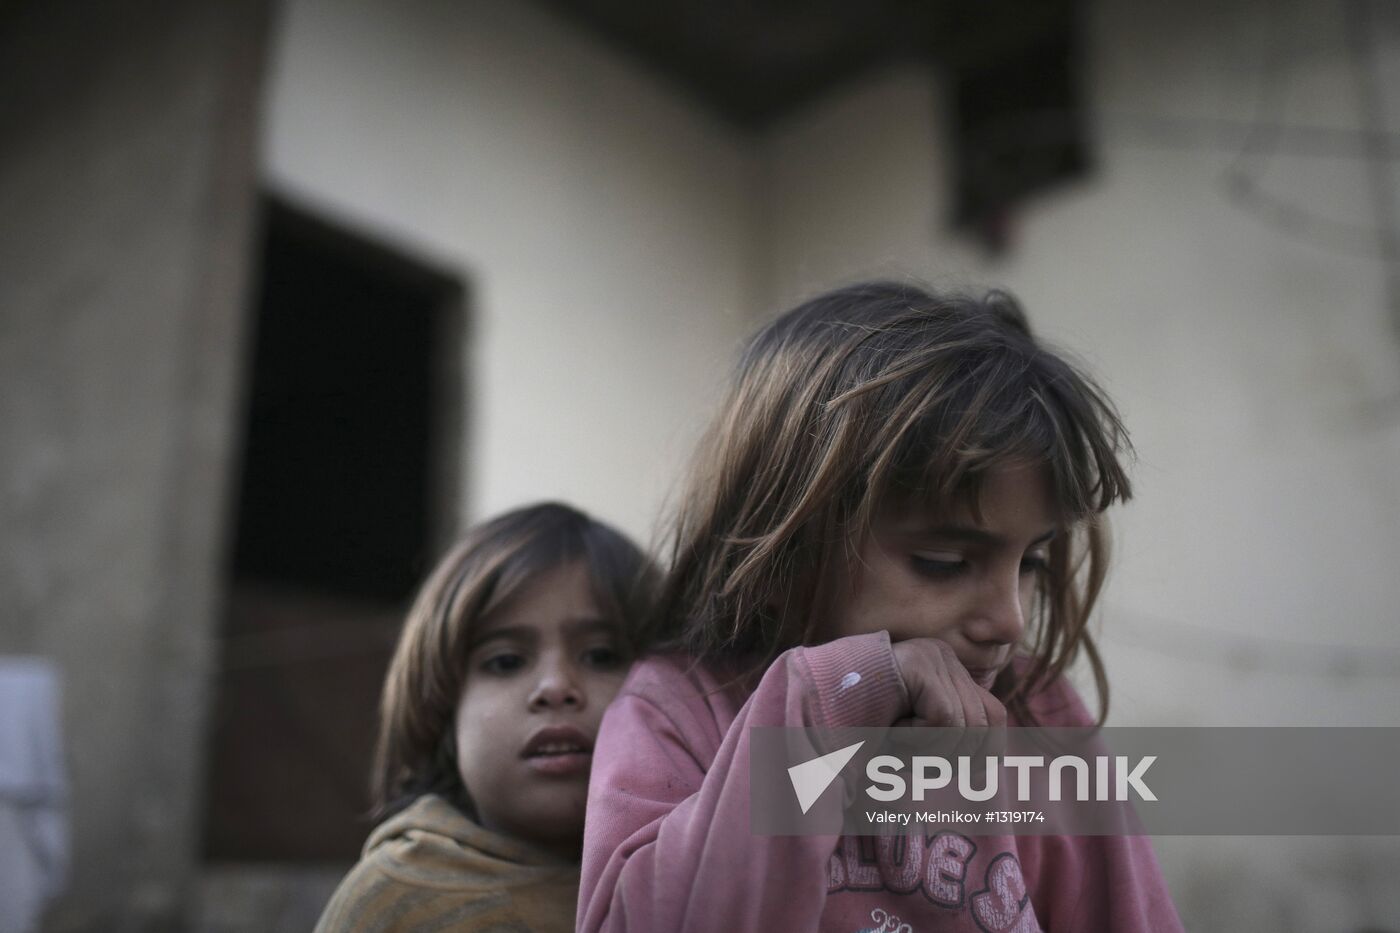 Syrian refugees in Lebanon's Bekaa Valley